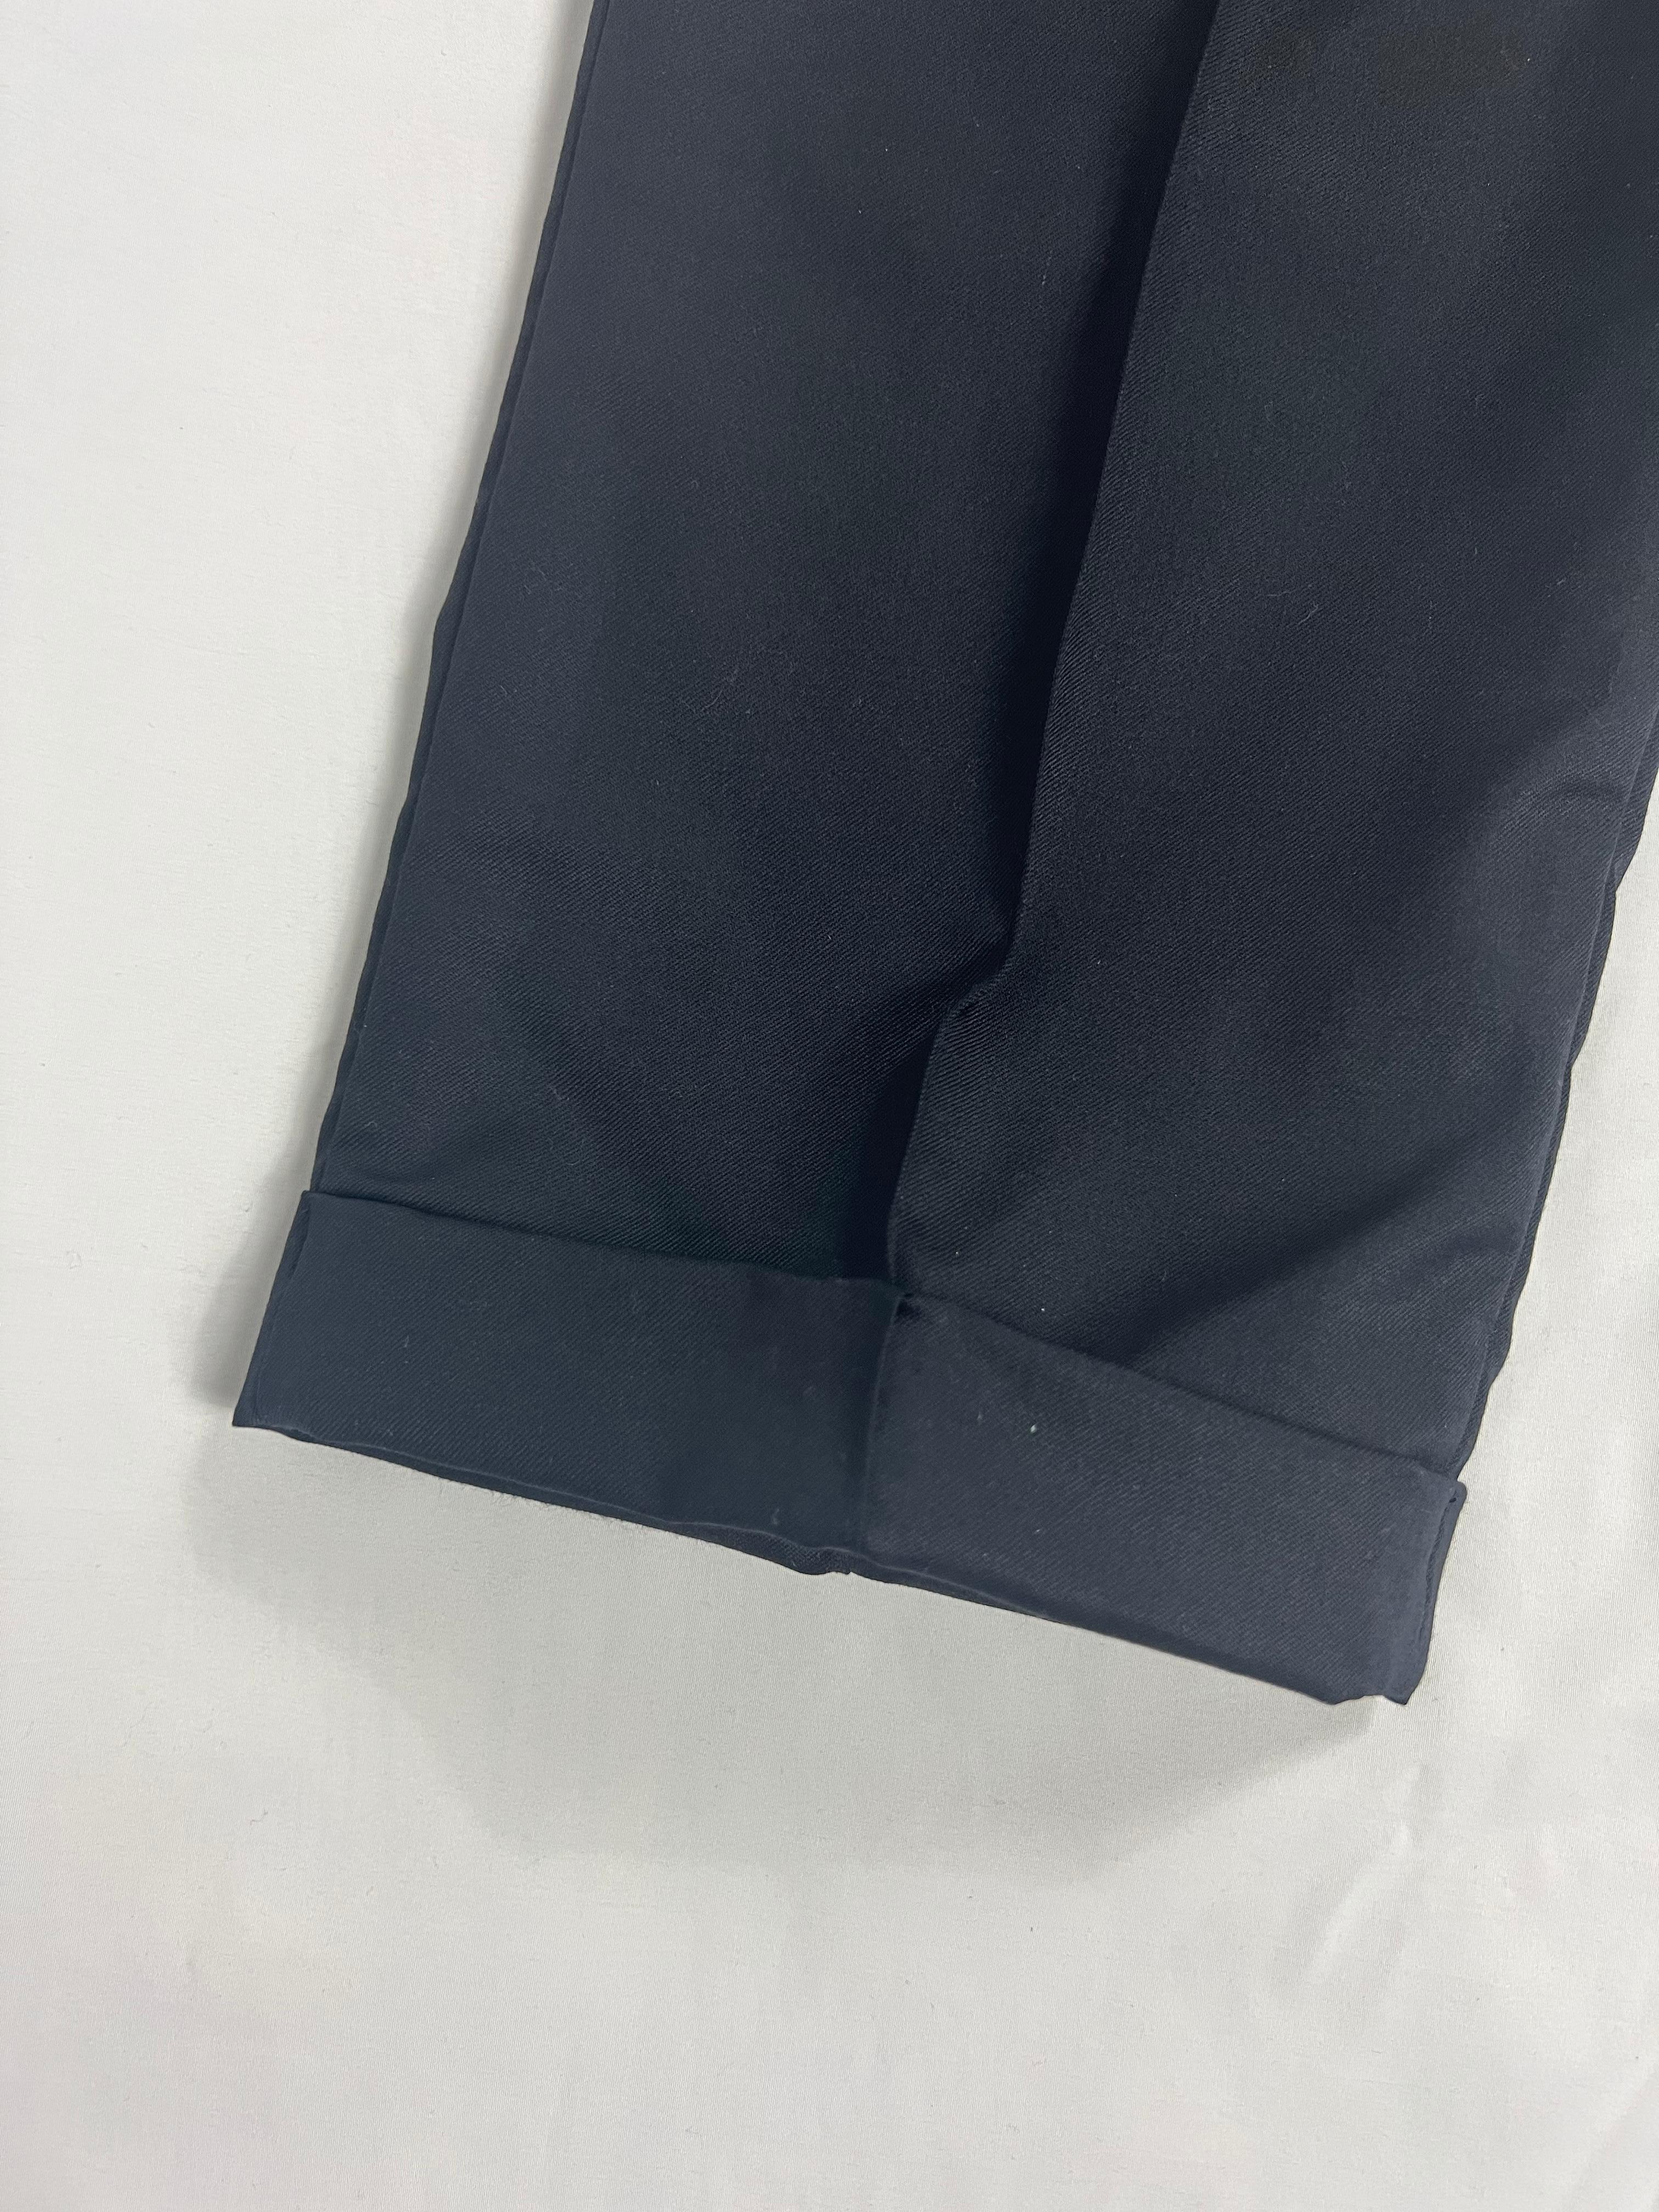 Julien David Navy Trousers Pants

- mid raise
- Straight fit
- Front button and zip closure
- Folded detail at the bottom of the pants
- Side pockets
- Dual rear pockets with button closure
- Loops for the belt
- Elastic/ rubber band at the waist
-